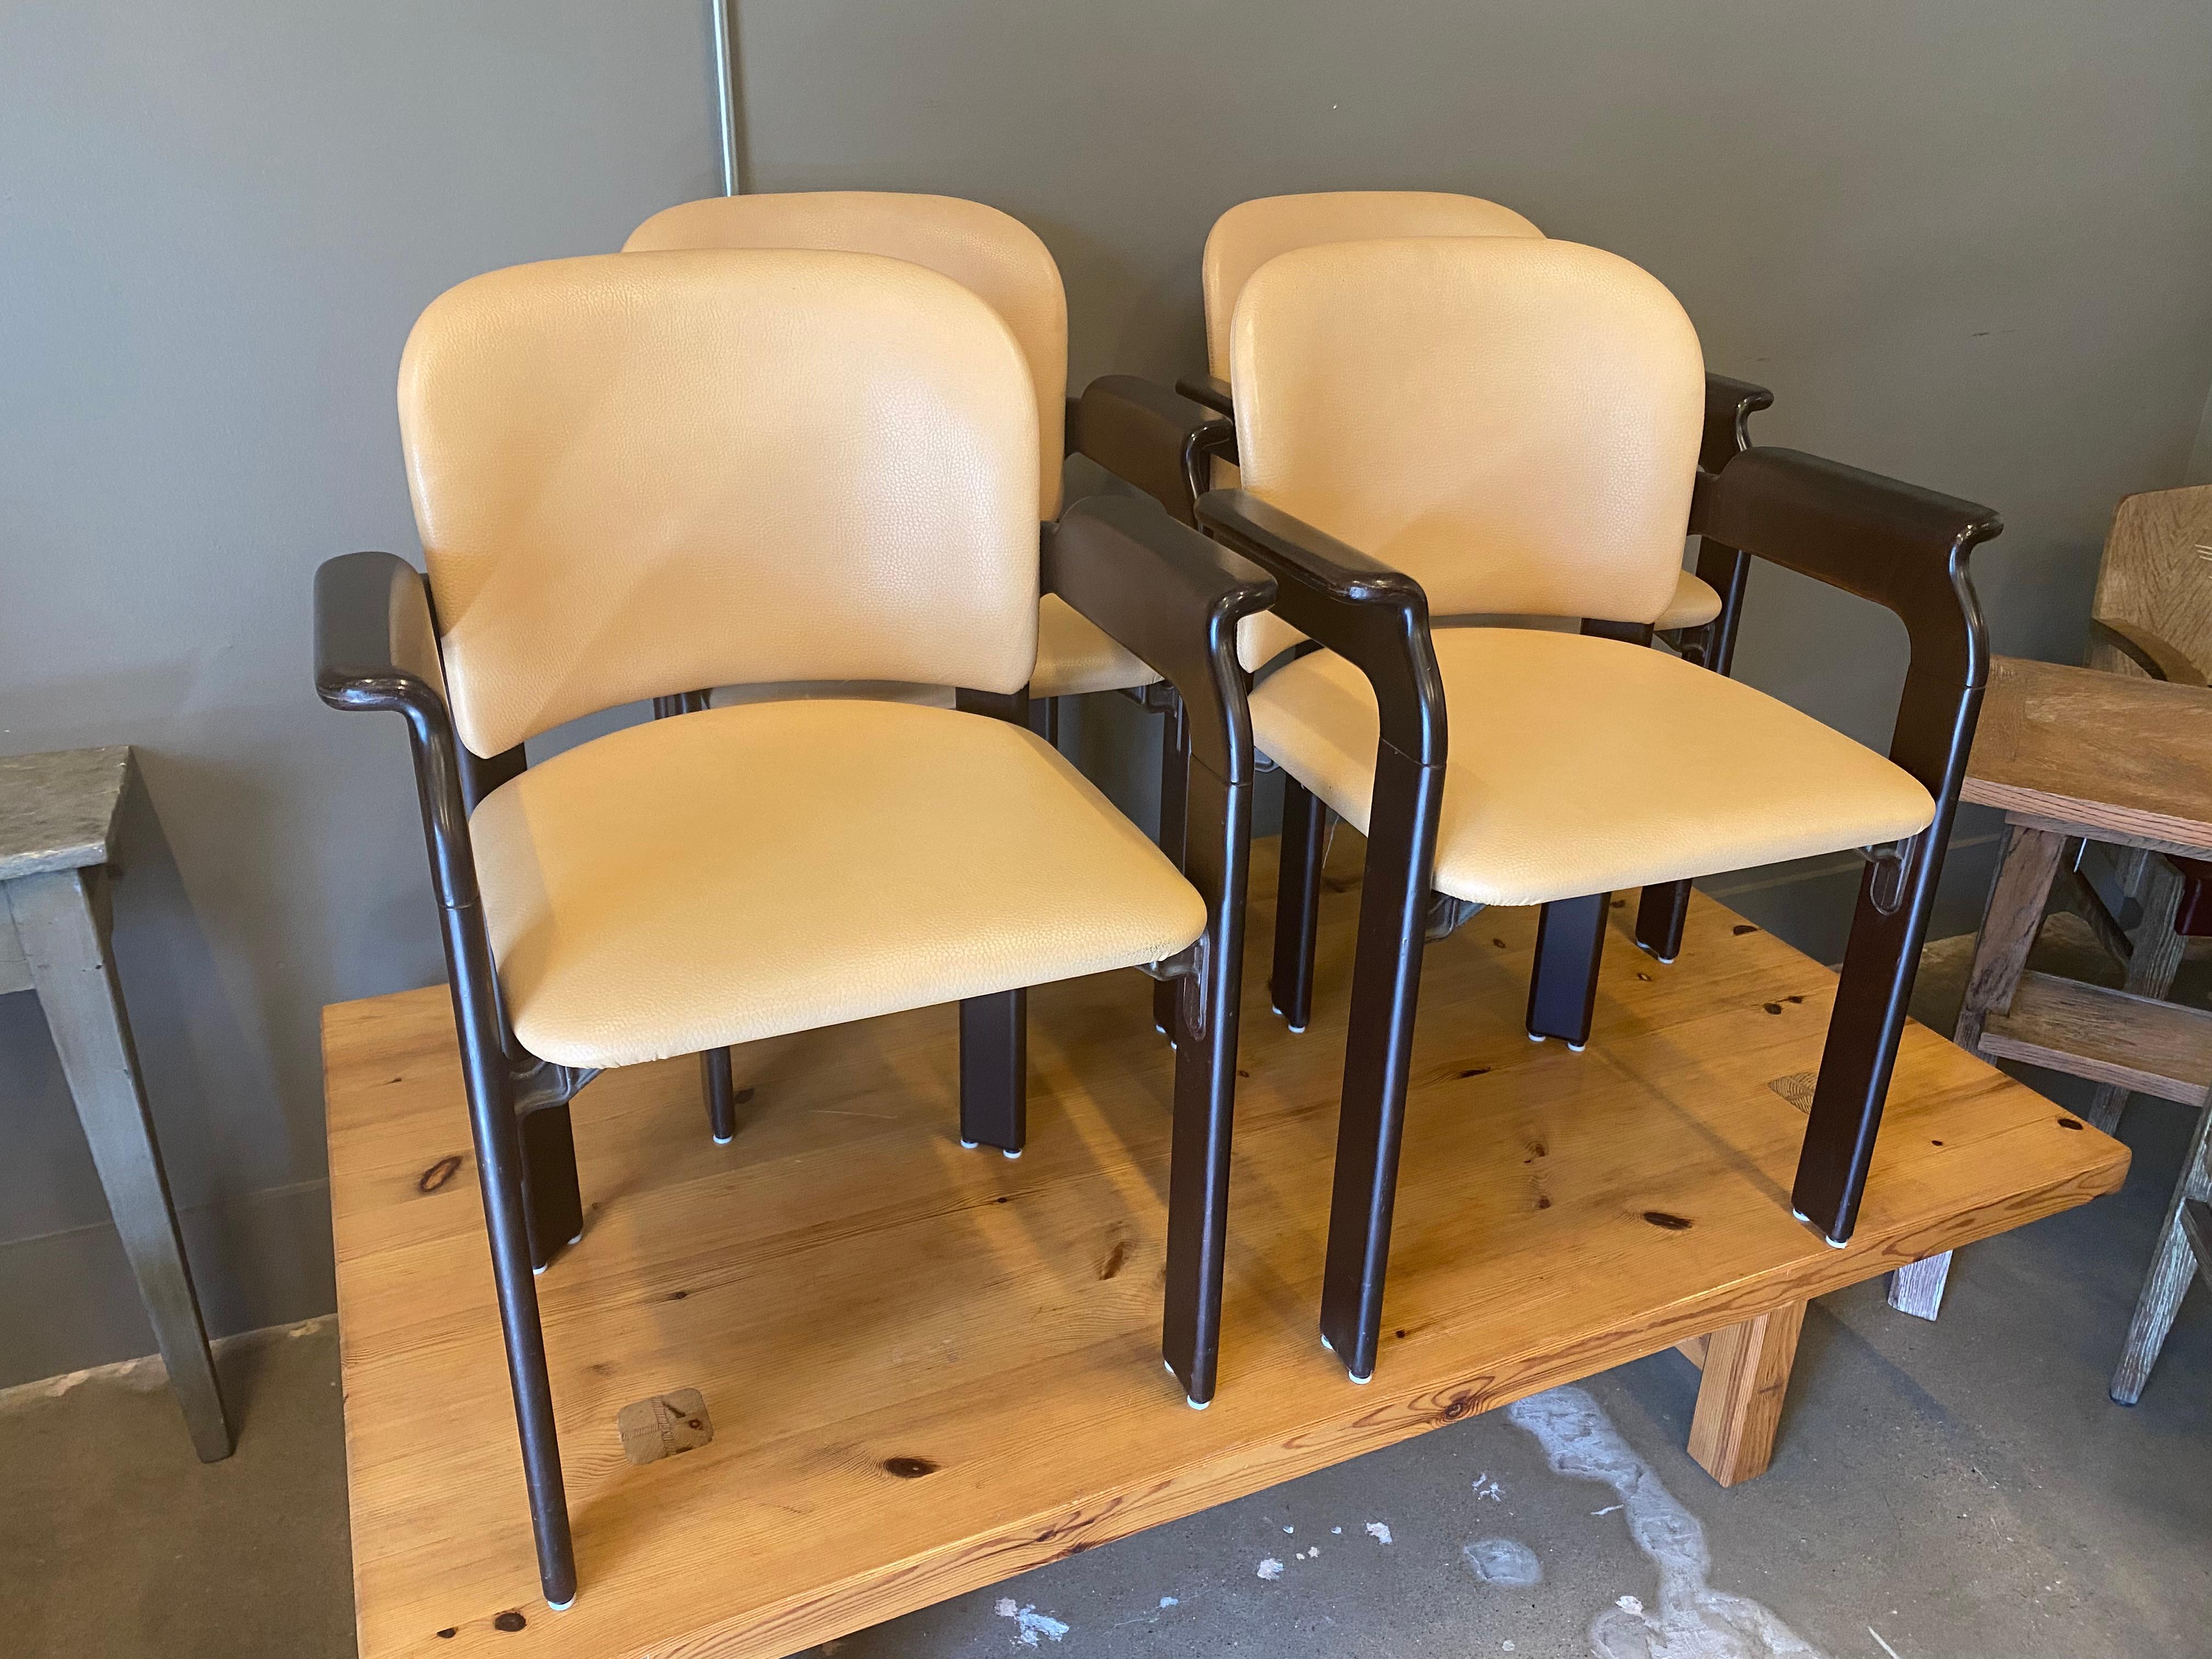 Scandinavian modern styled armed dining chairs by Robert and Trix Haussmann for Dietiker. Designed in mid-1960's with continued manufacturing. Ebonized hardwood frames and buff colored leather seats and backs. Comfortable and, because these are more